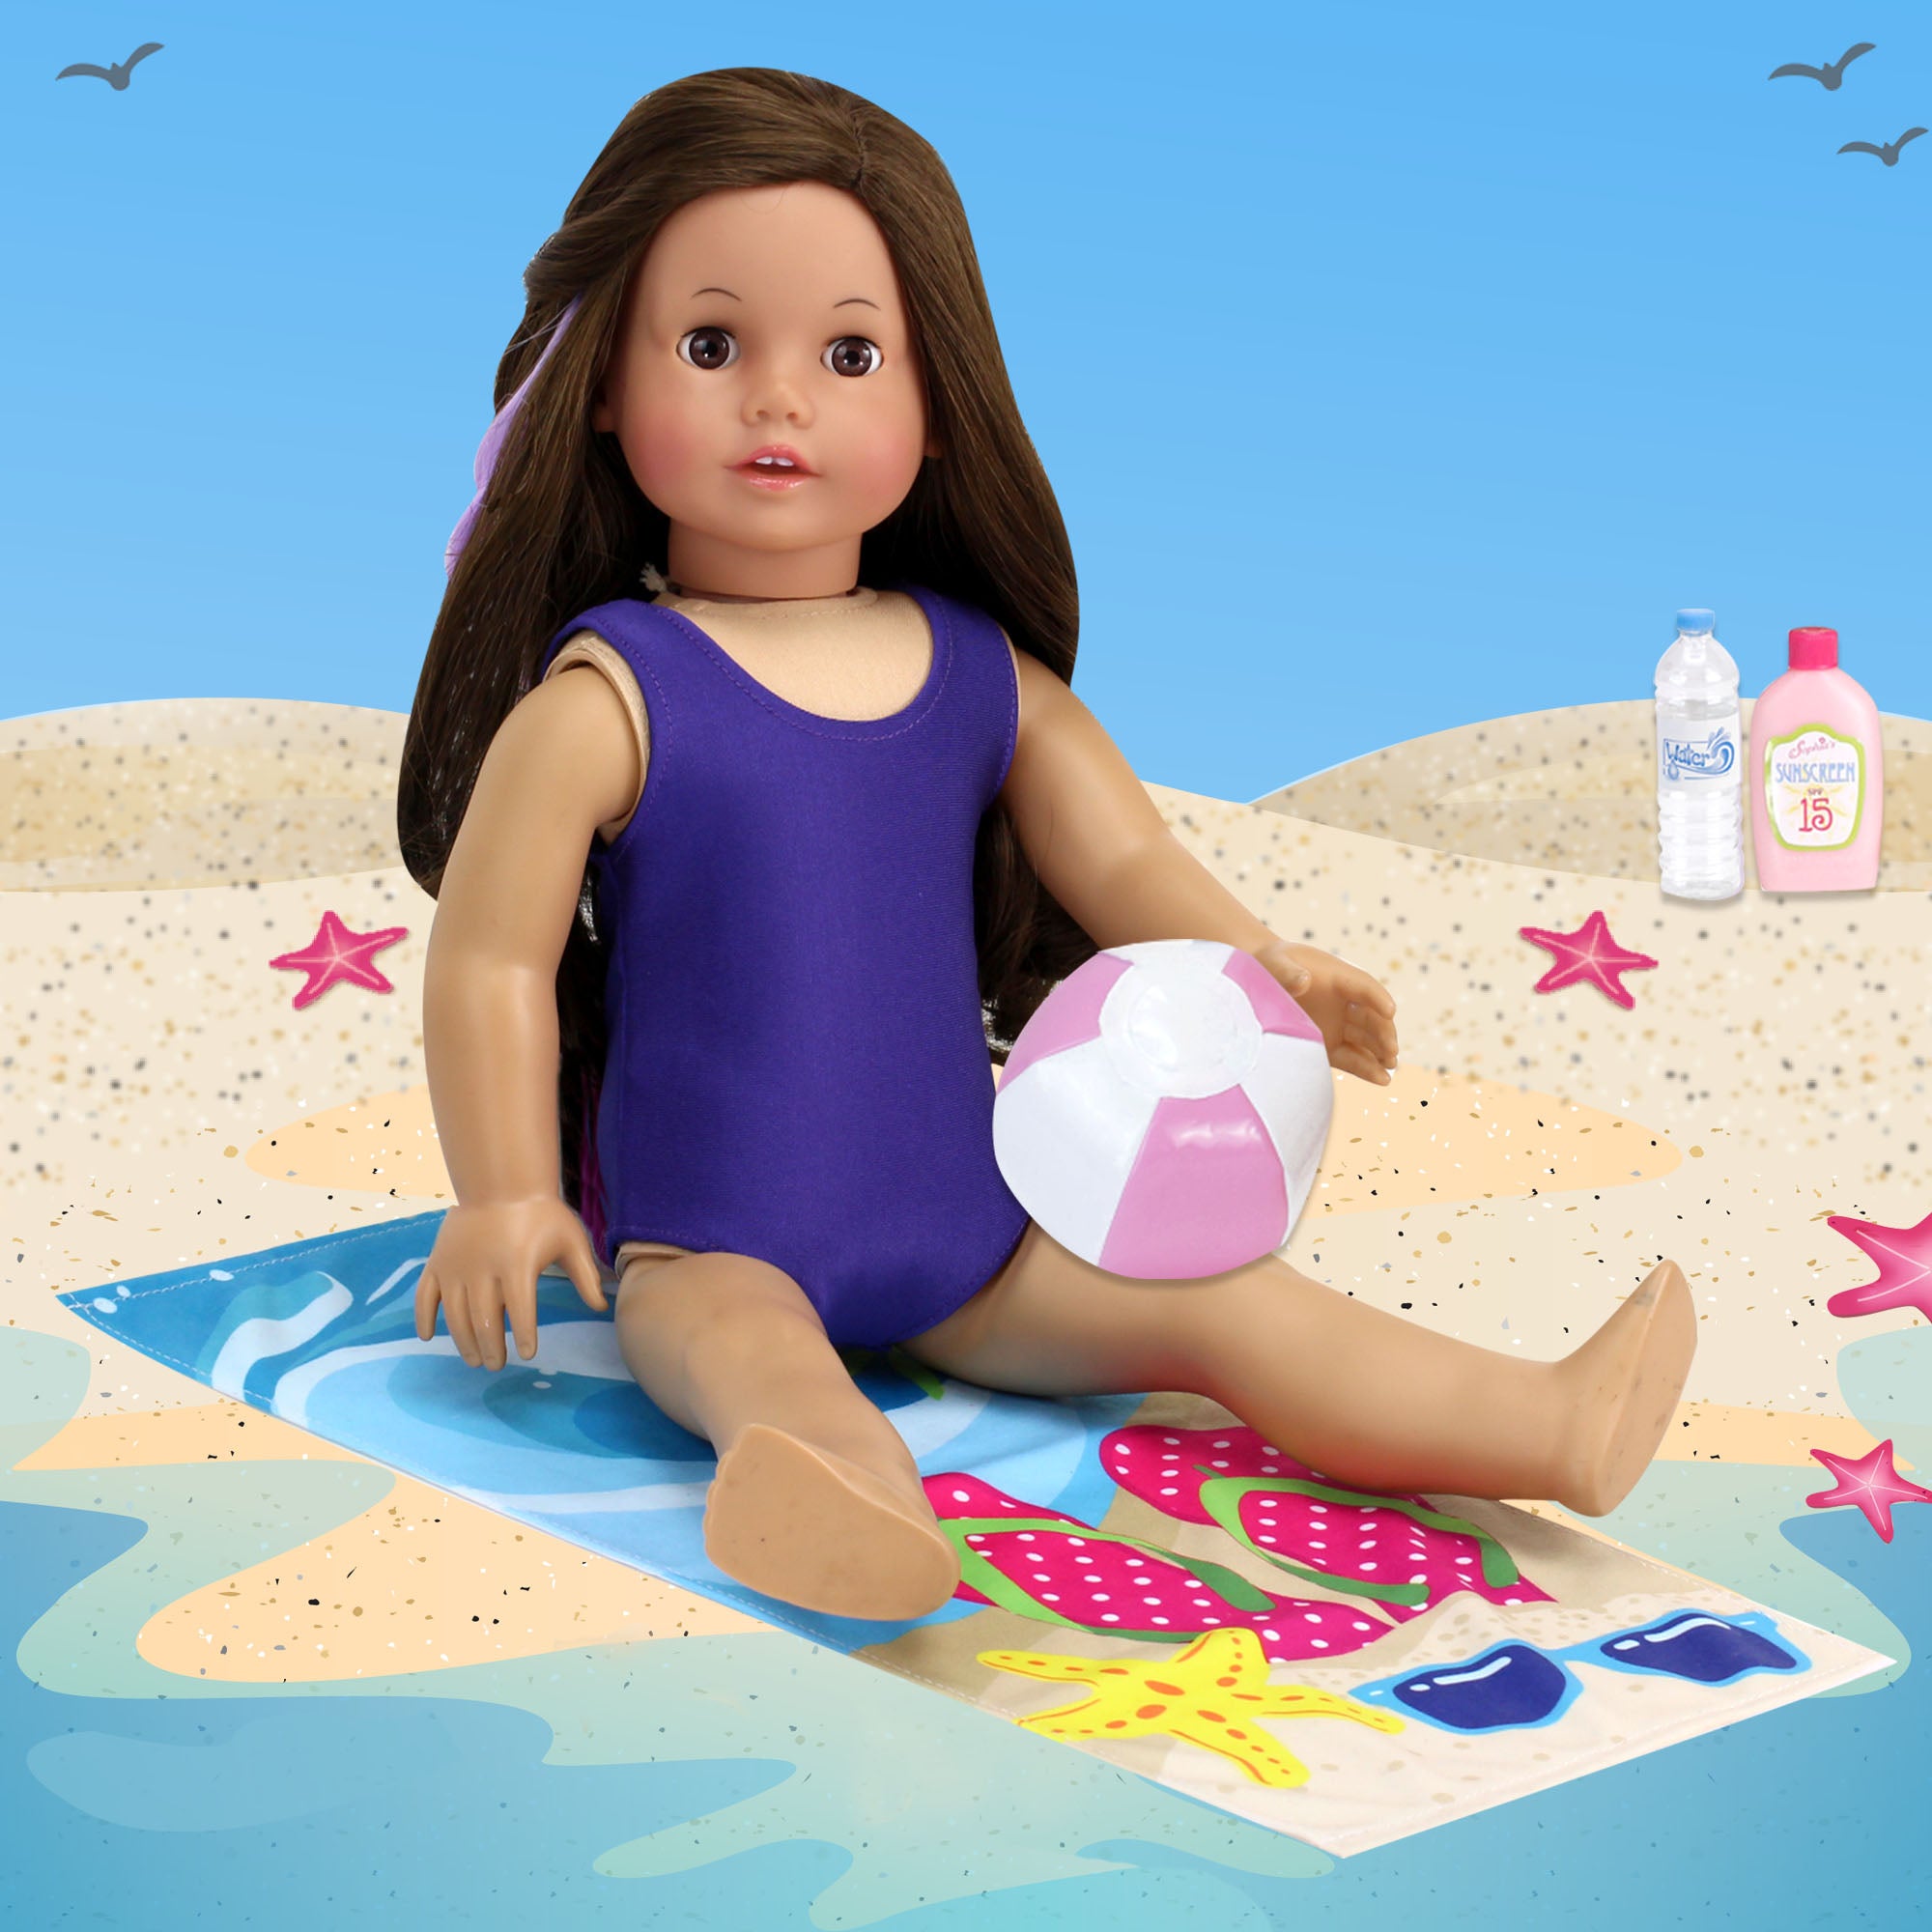 Sophia’s Beach Day Play Set with Bathing Suit, Towel, Water Bottle, Sunscreen, & Inflatable Beach Ball for 18” Dolls